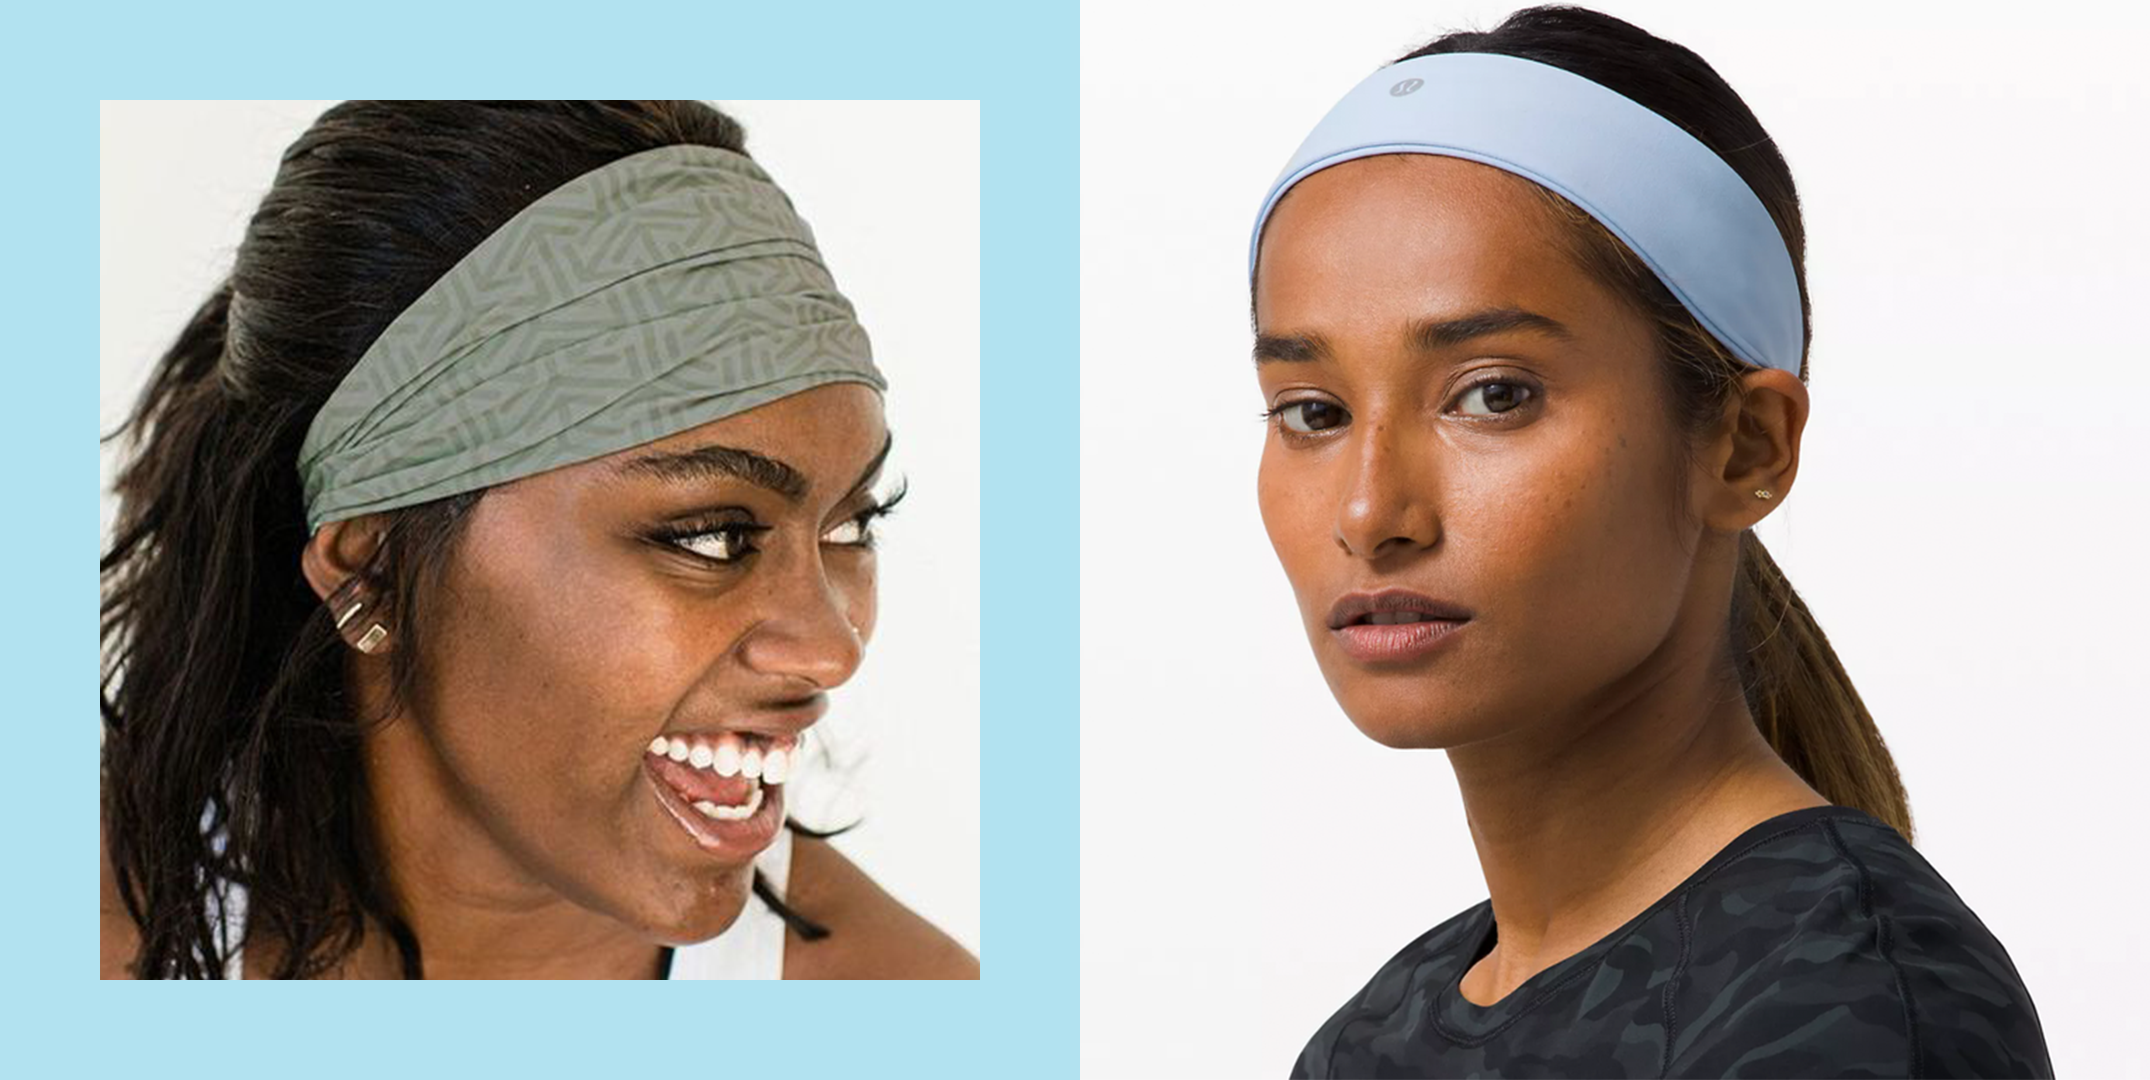 The Best Workout Headbands For Preserving Your Edges